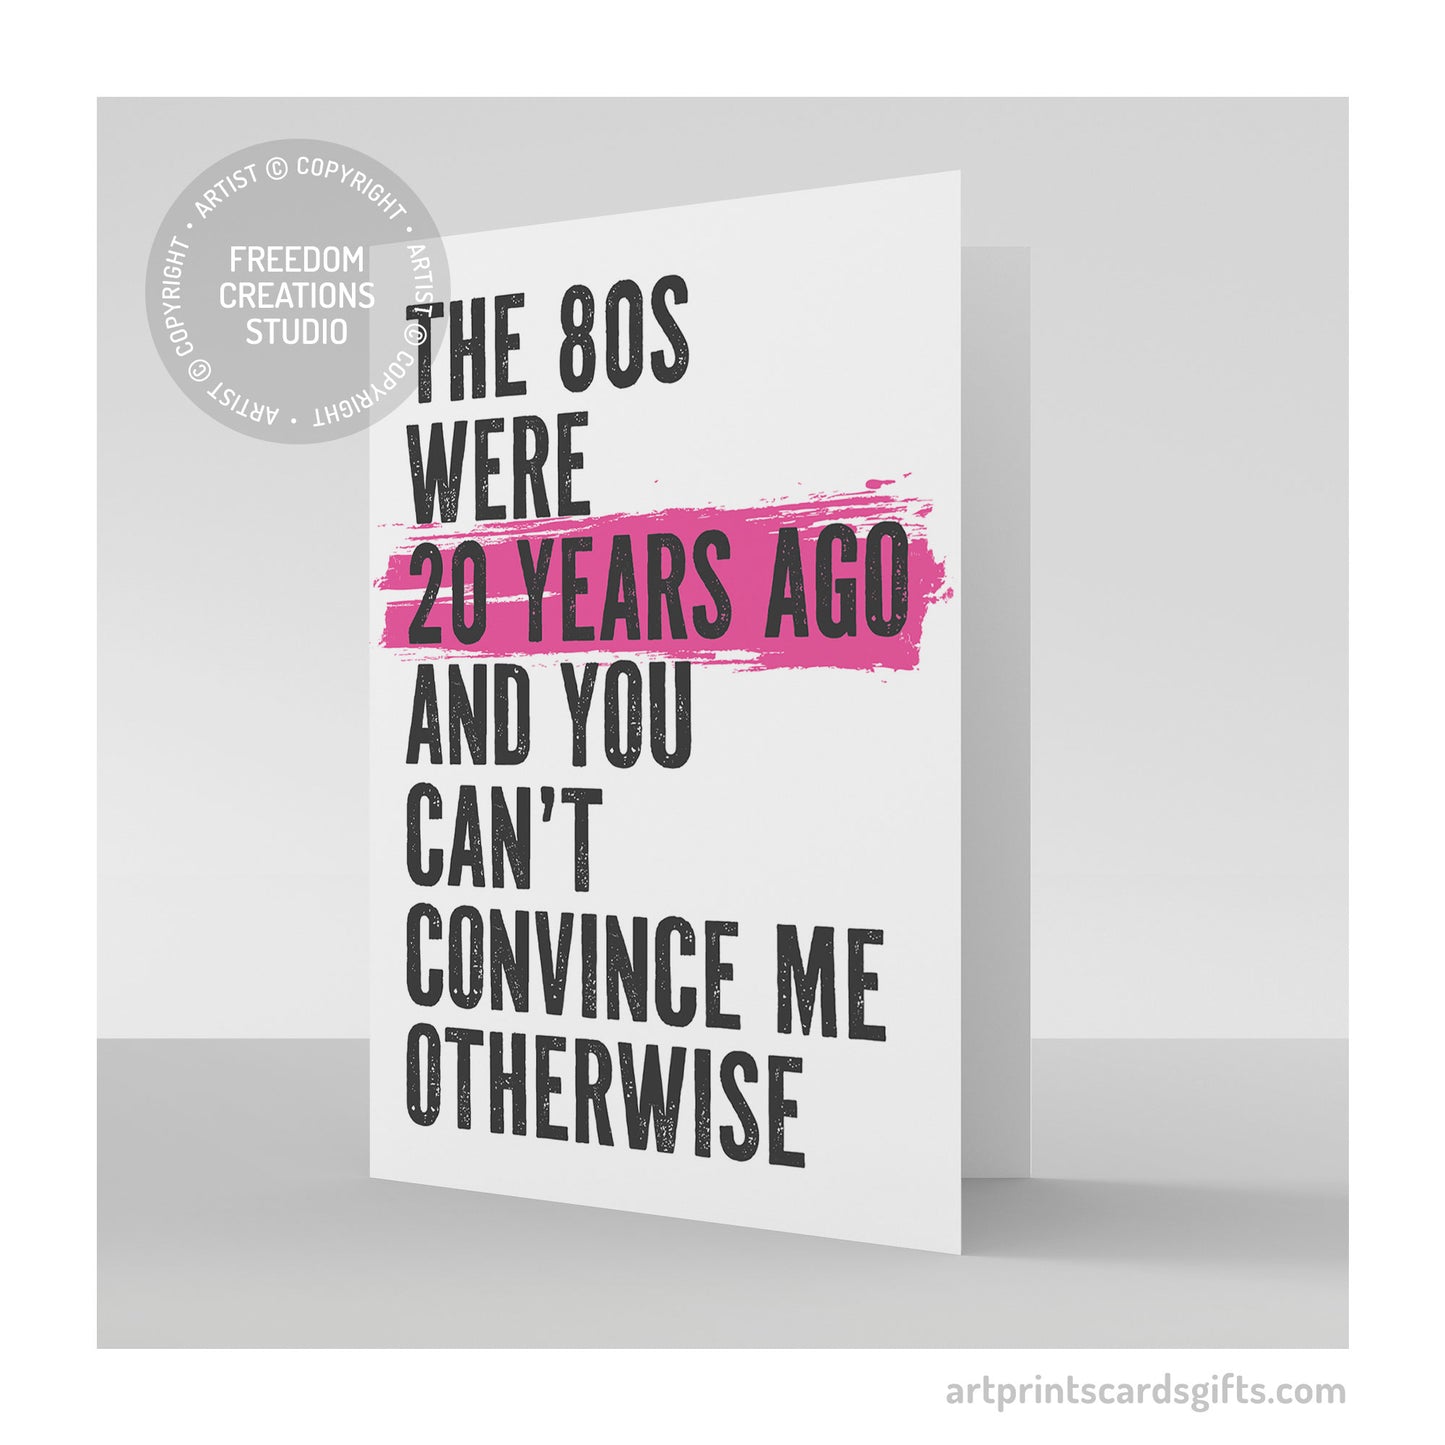 The 80s were 20 years ago